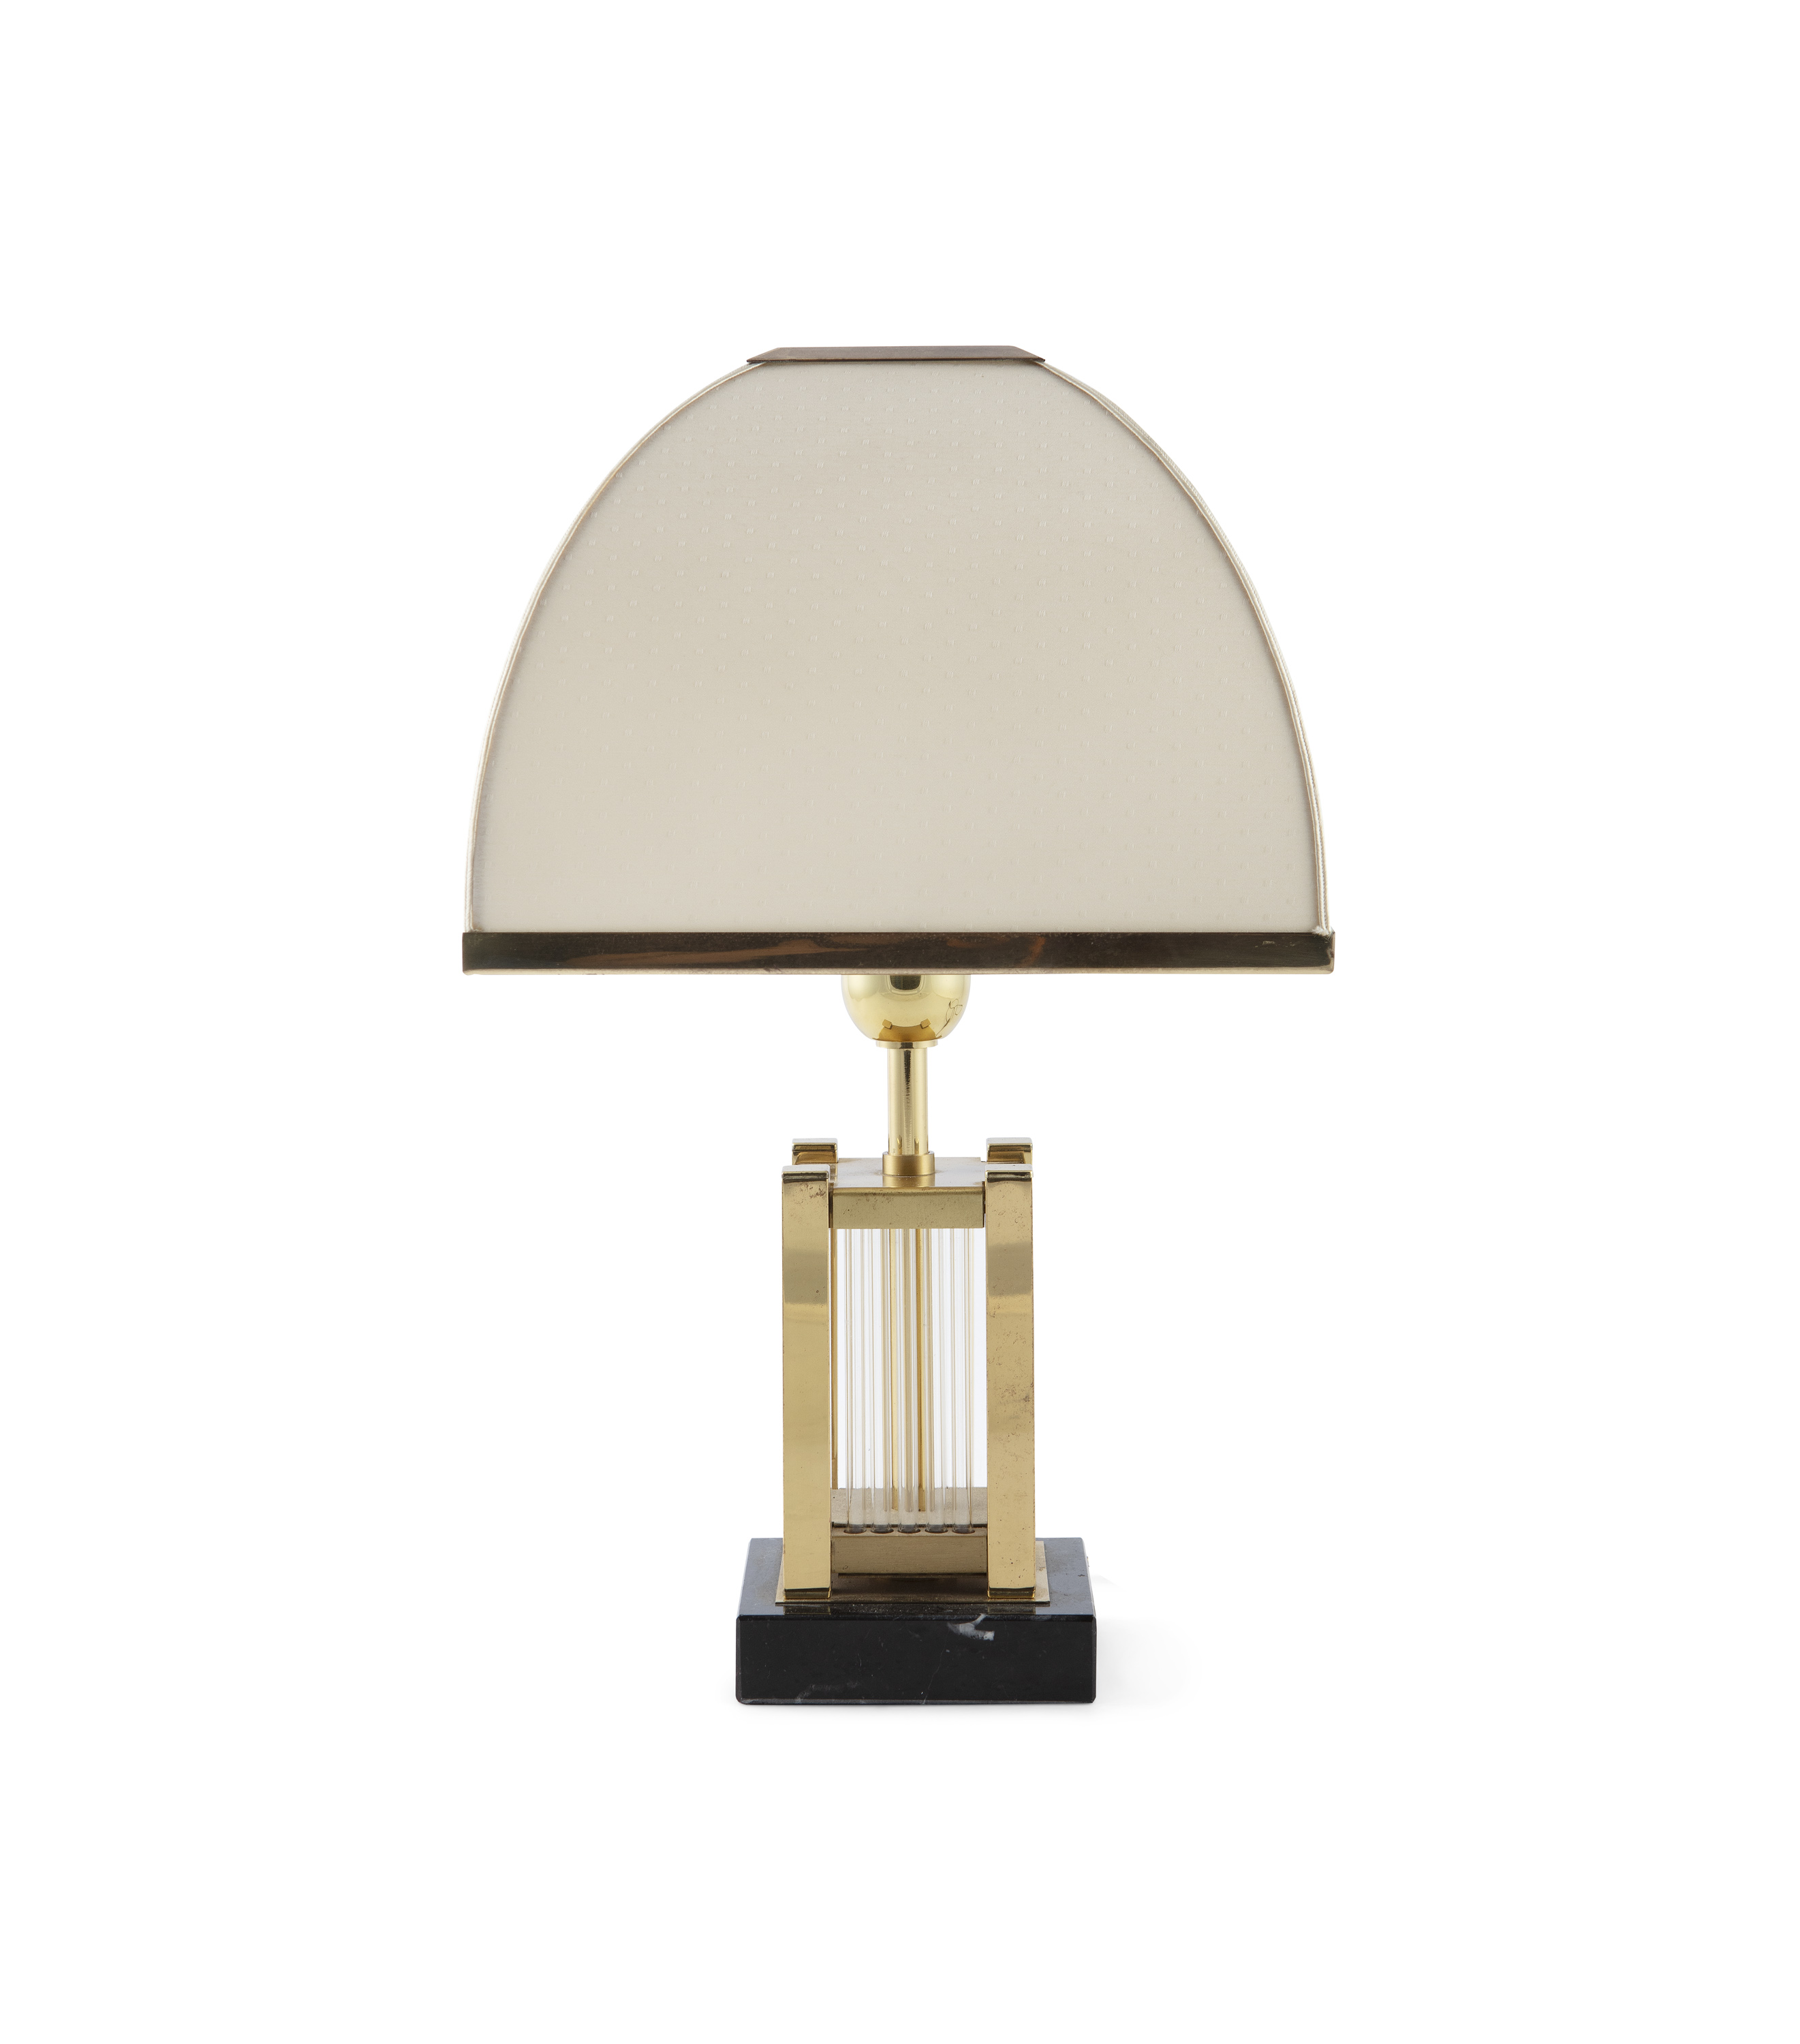 ROMEO REGA A Romeo Rega lamp in brass and glass, on a marble base, Italy c.1960. 42cm high - Image 2 of 3